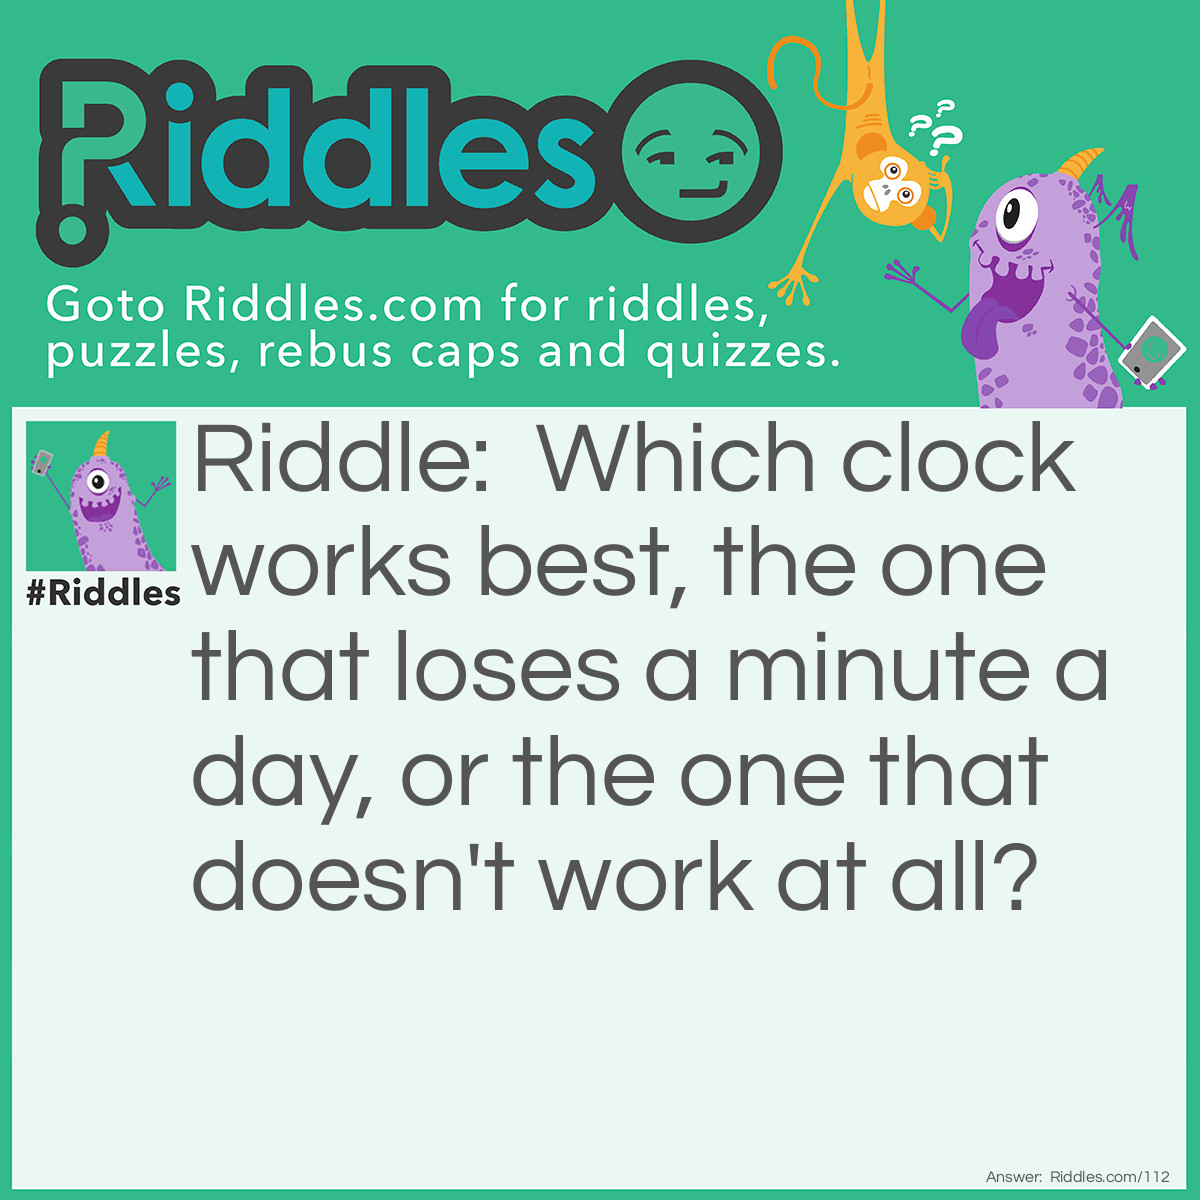 Riddle: Which clock works best, the one that loses a minute a day, or the one that doesn't work at all? Answer: The one that doesn't work is best. It will always be correct twice a day, but the one that loses a minute a day will not be correct again for 720 days (losing 720 minutes or 12 hours).